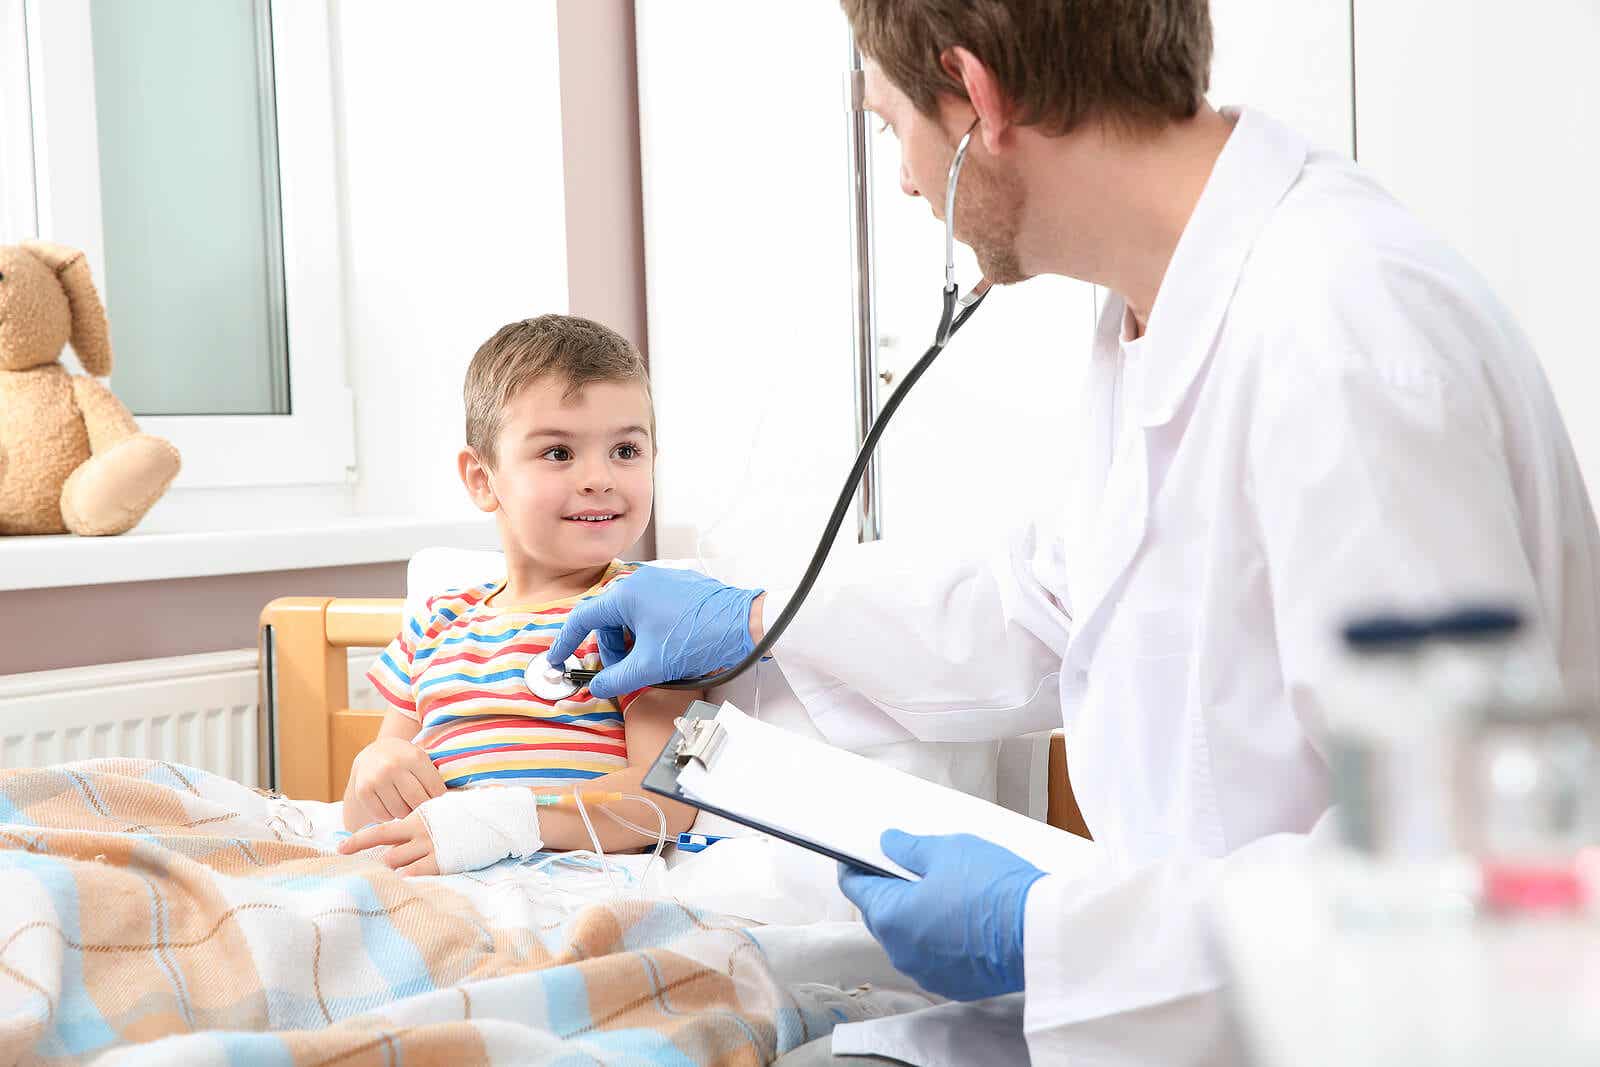 A doctor listening to a child's heart in a hospital room.